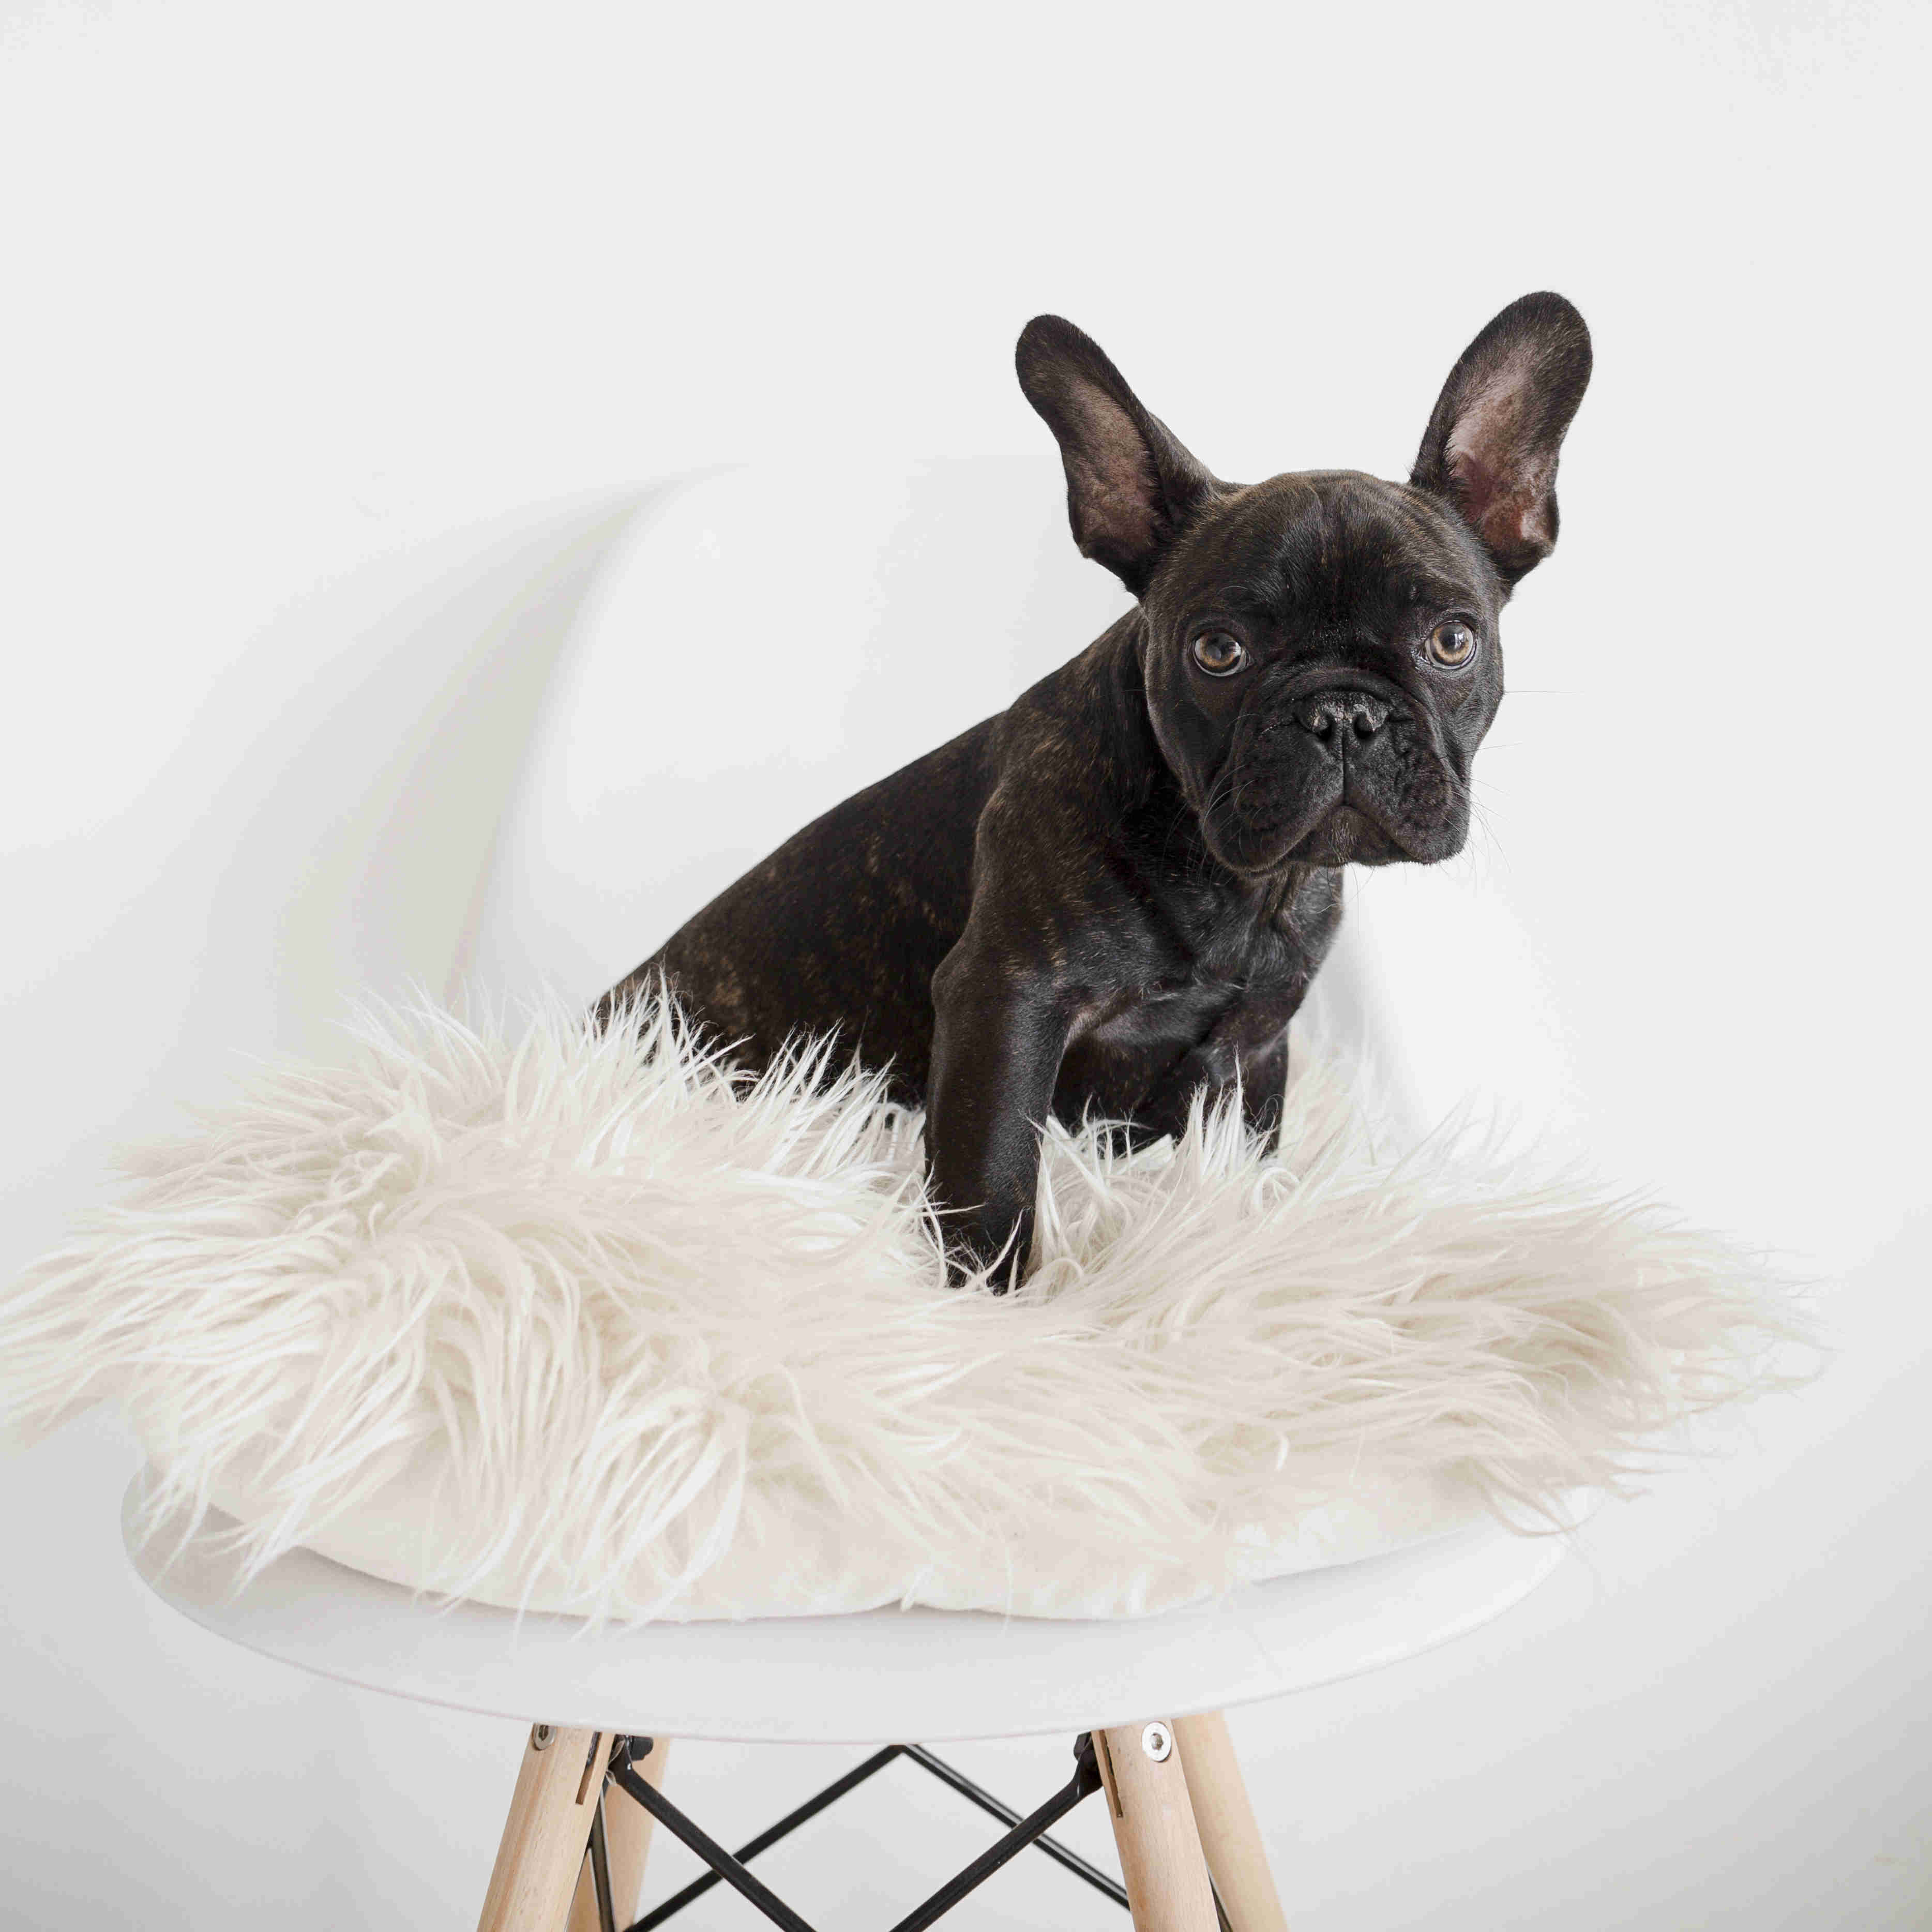 Top Tips to Prevent Bad Habits in French Bulldog Puppies: A Guide for New Owners